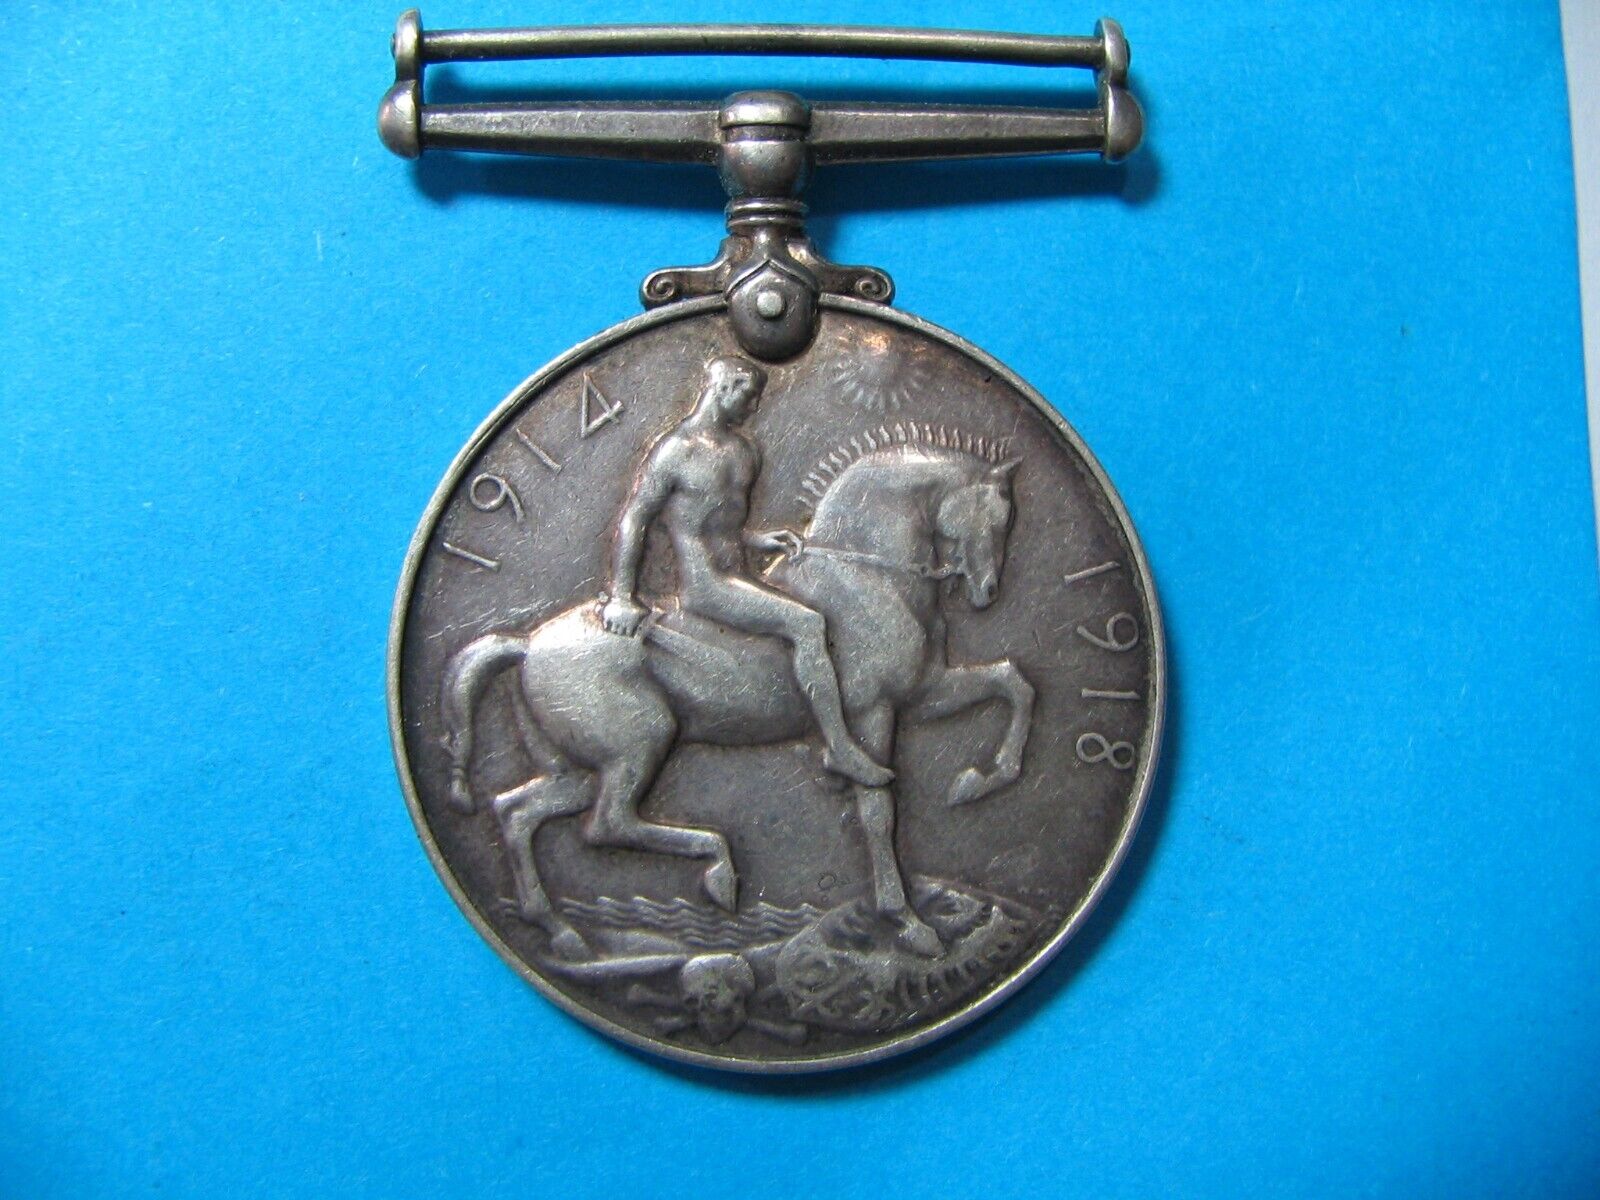 Named Canadian Expeditionary Force, British War Medal 1914-18, W/enlistment Docs